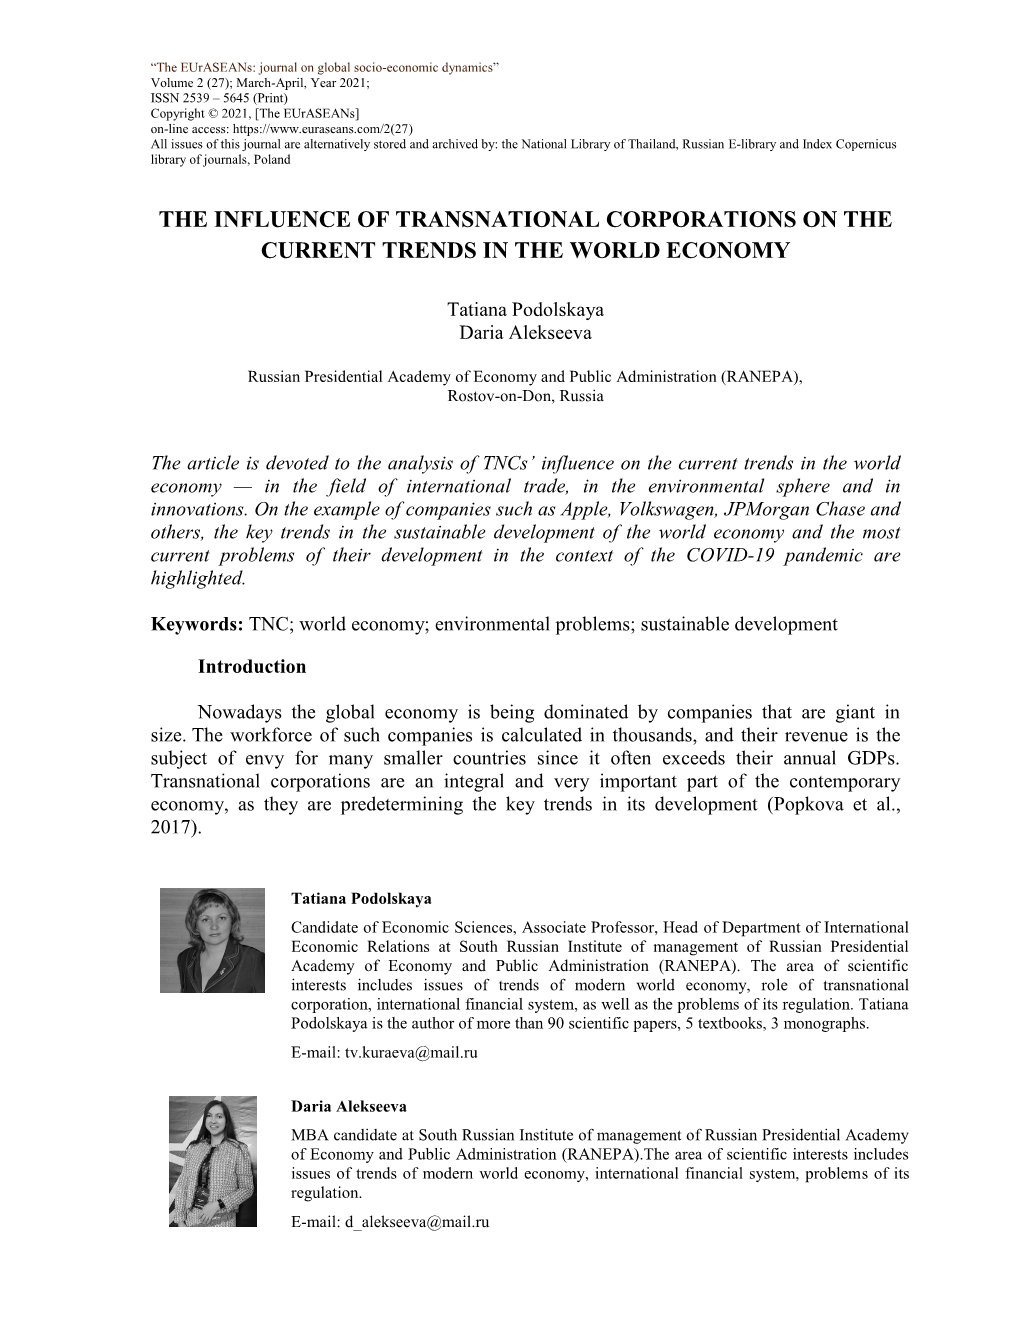 The Influence of Transnational Corporations on the Current Trends in the World Economy